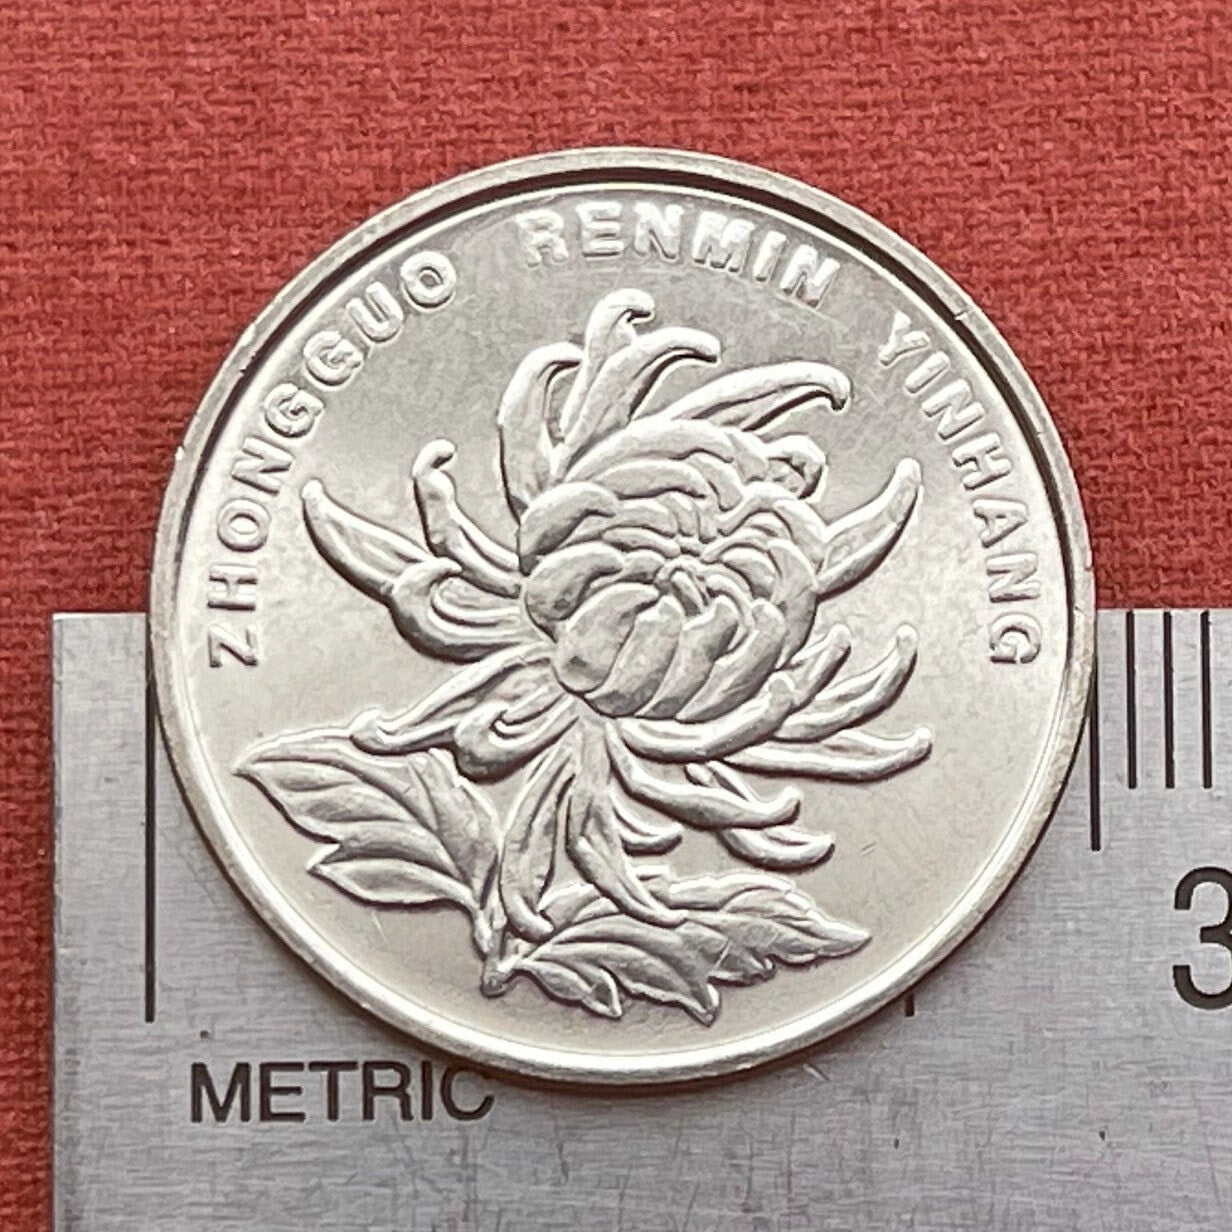 Chrysanthemum 1 Yuan China Authentic Coin Money for Jewelry and Craft Making (Peoples Republic of China) (Longevity)